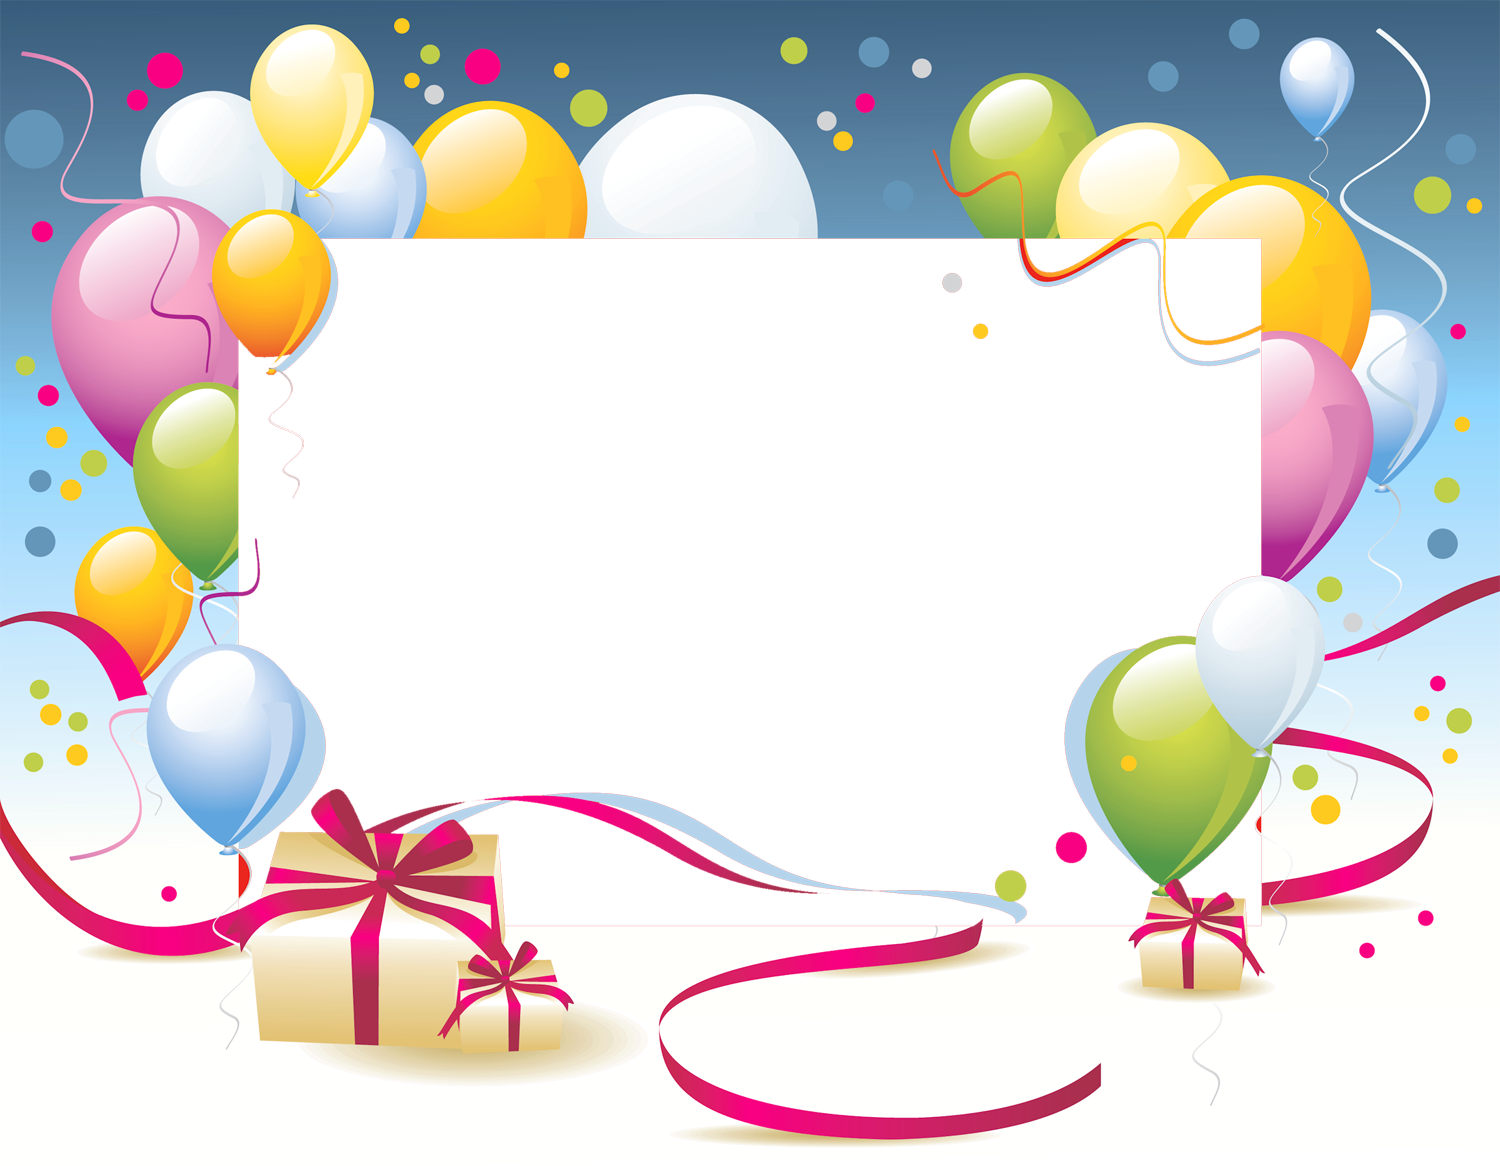 Birthday Frame Wallpapers - Wallpaper Cave